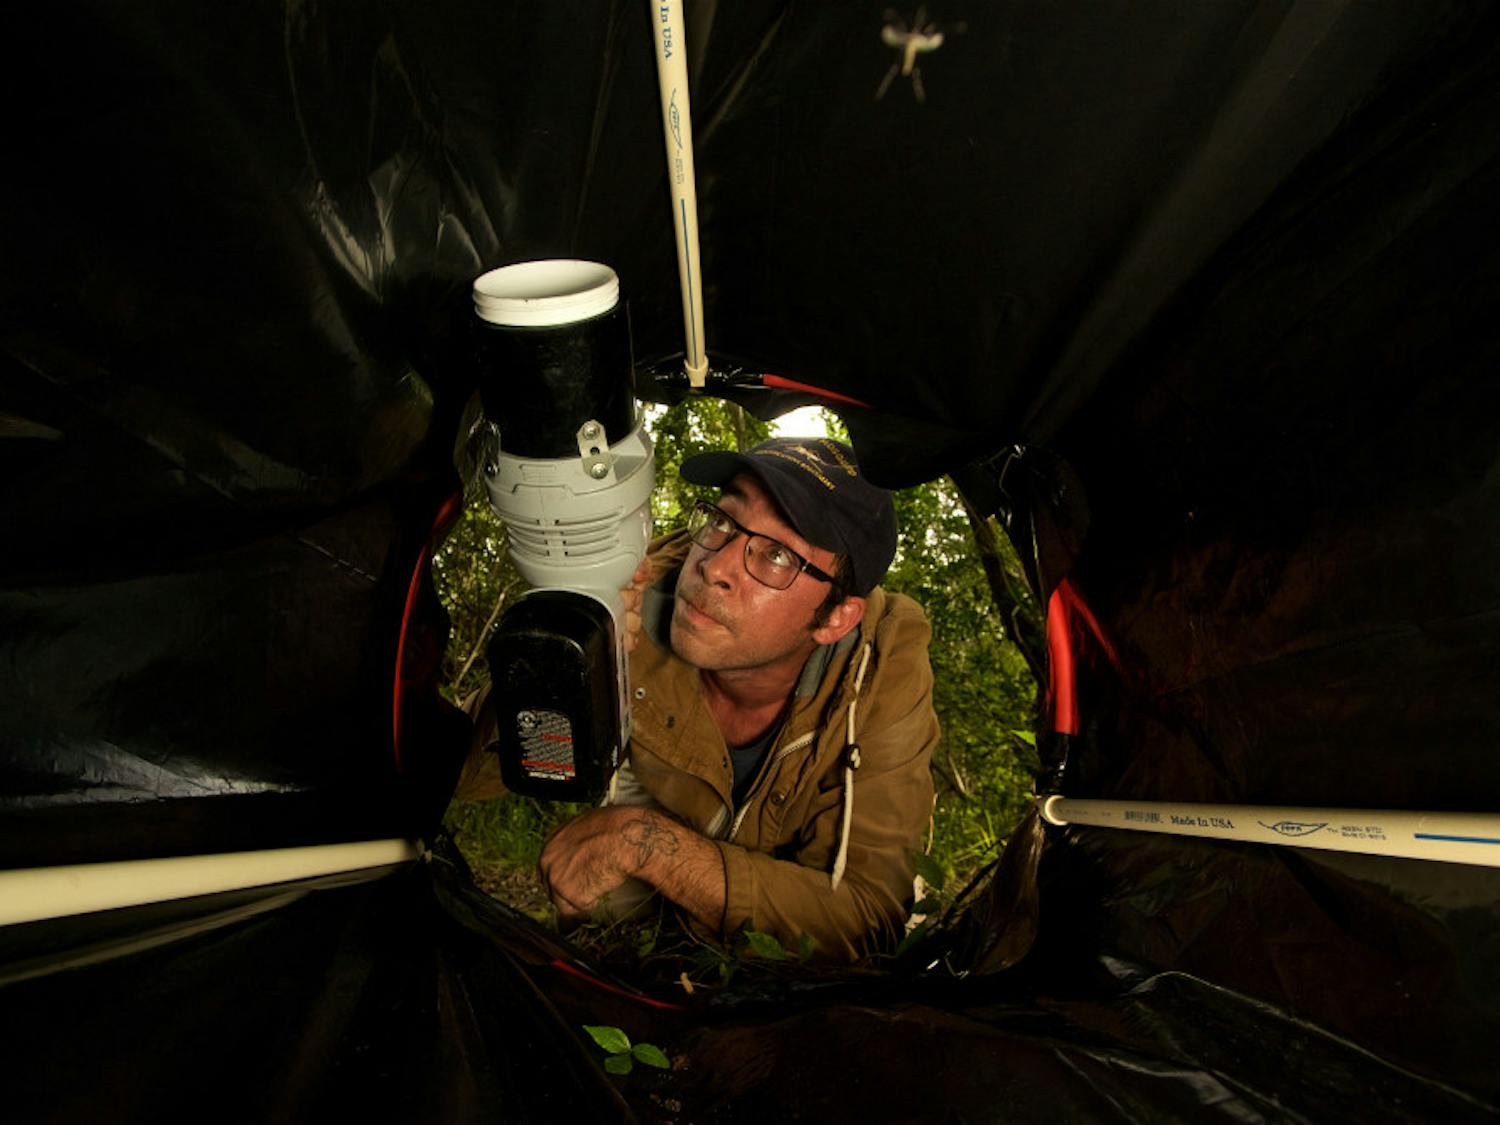 Lawrence E. Reeves, 35, spent a little more than a year in a controlled studying the DNA of Florida mosquitoes to see if they bit invasive Burmese pythons. He’s now a postdoctoral researcher at UF’s Institute of Food and Agricultural Sciences’ Florida Medical Entomology Lab in Vero Beach, Florida, where he is testing his research in the Everglades. 